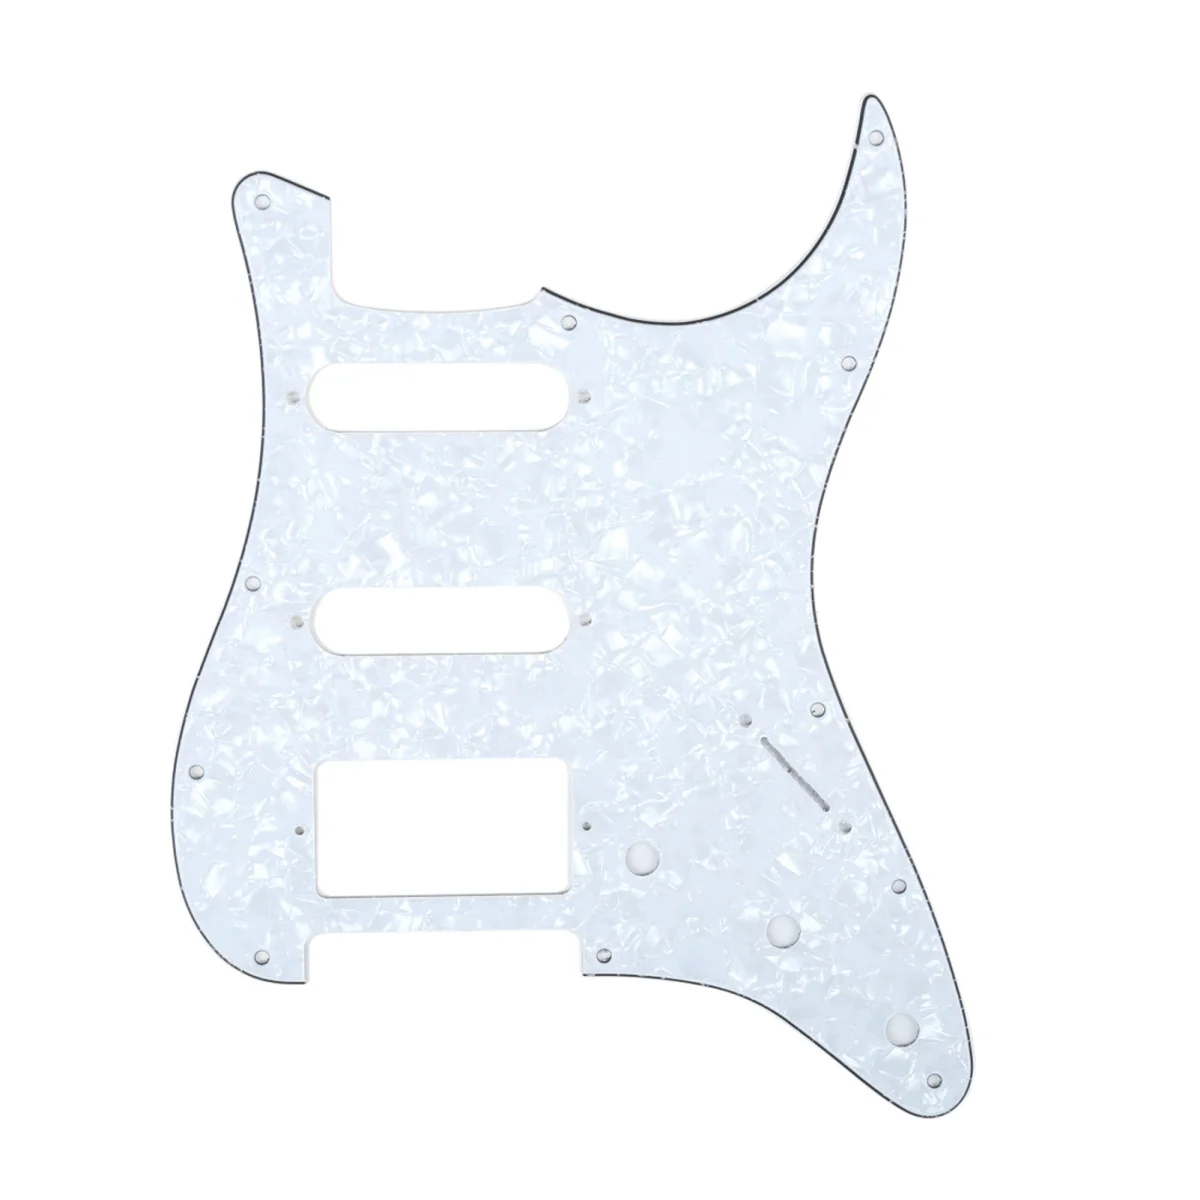 

Musiclily HSS 11 Hole Guitar Strat Pickguard for Fender USA/Mexican Made Standard Stratocaster Modern Style, 4Ply White Pearl